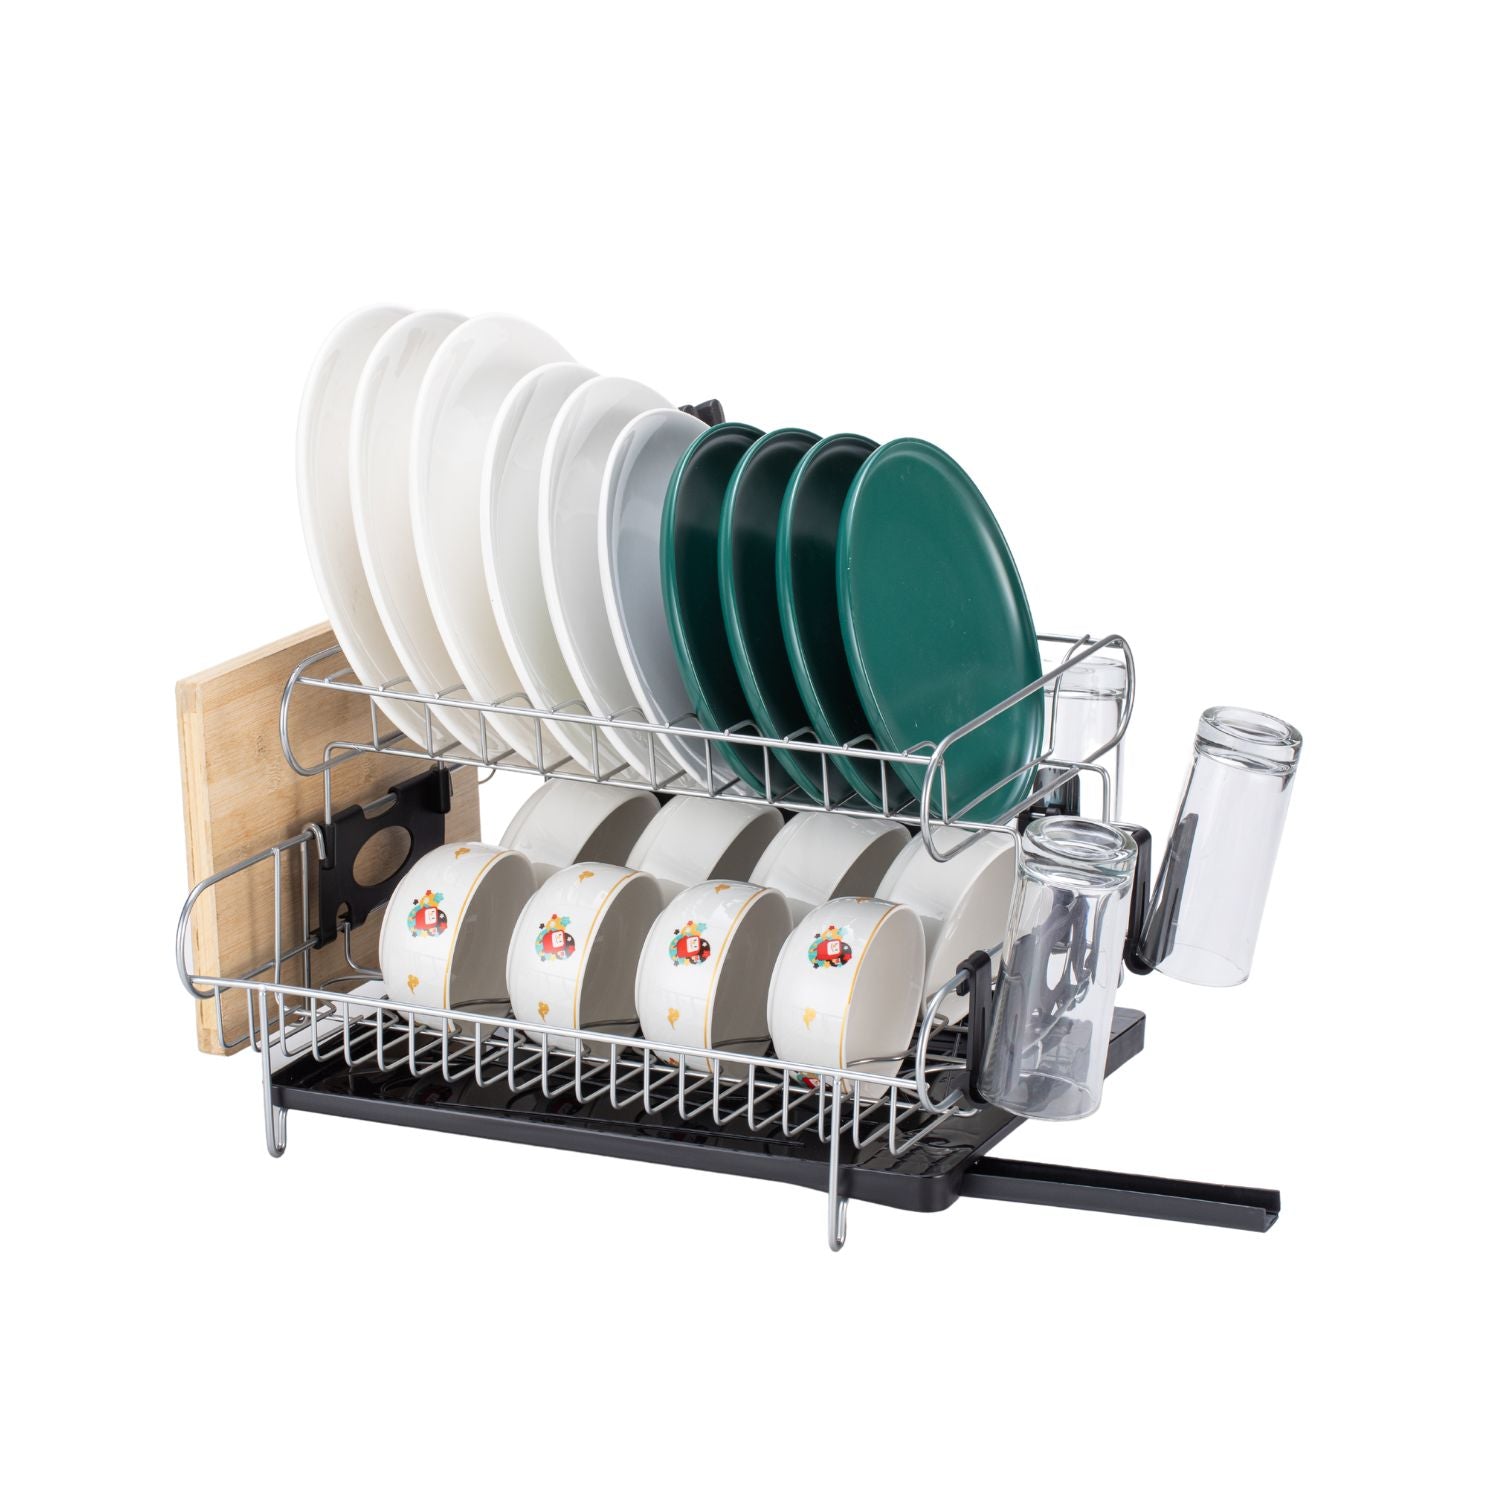 GOMINIMO 2-Tier Dish Drying Rack with Draining Board and Cup Holder